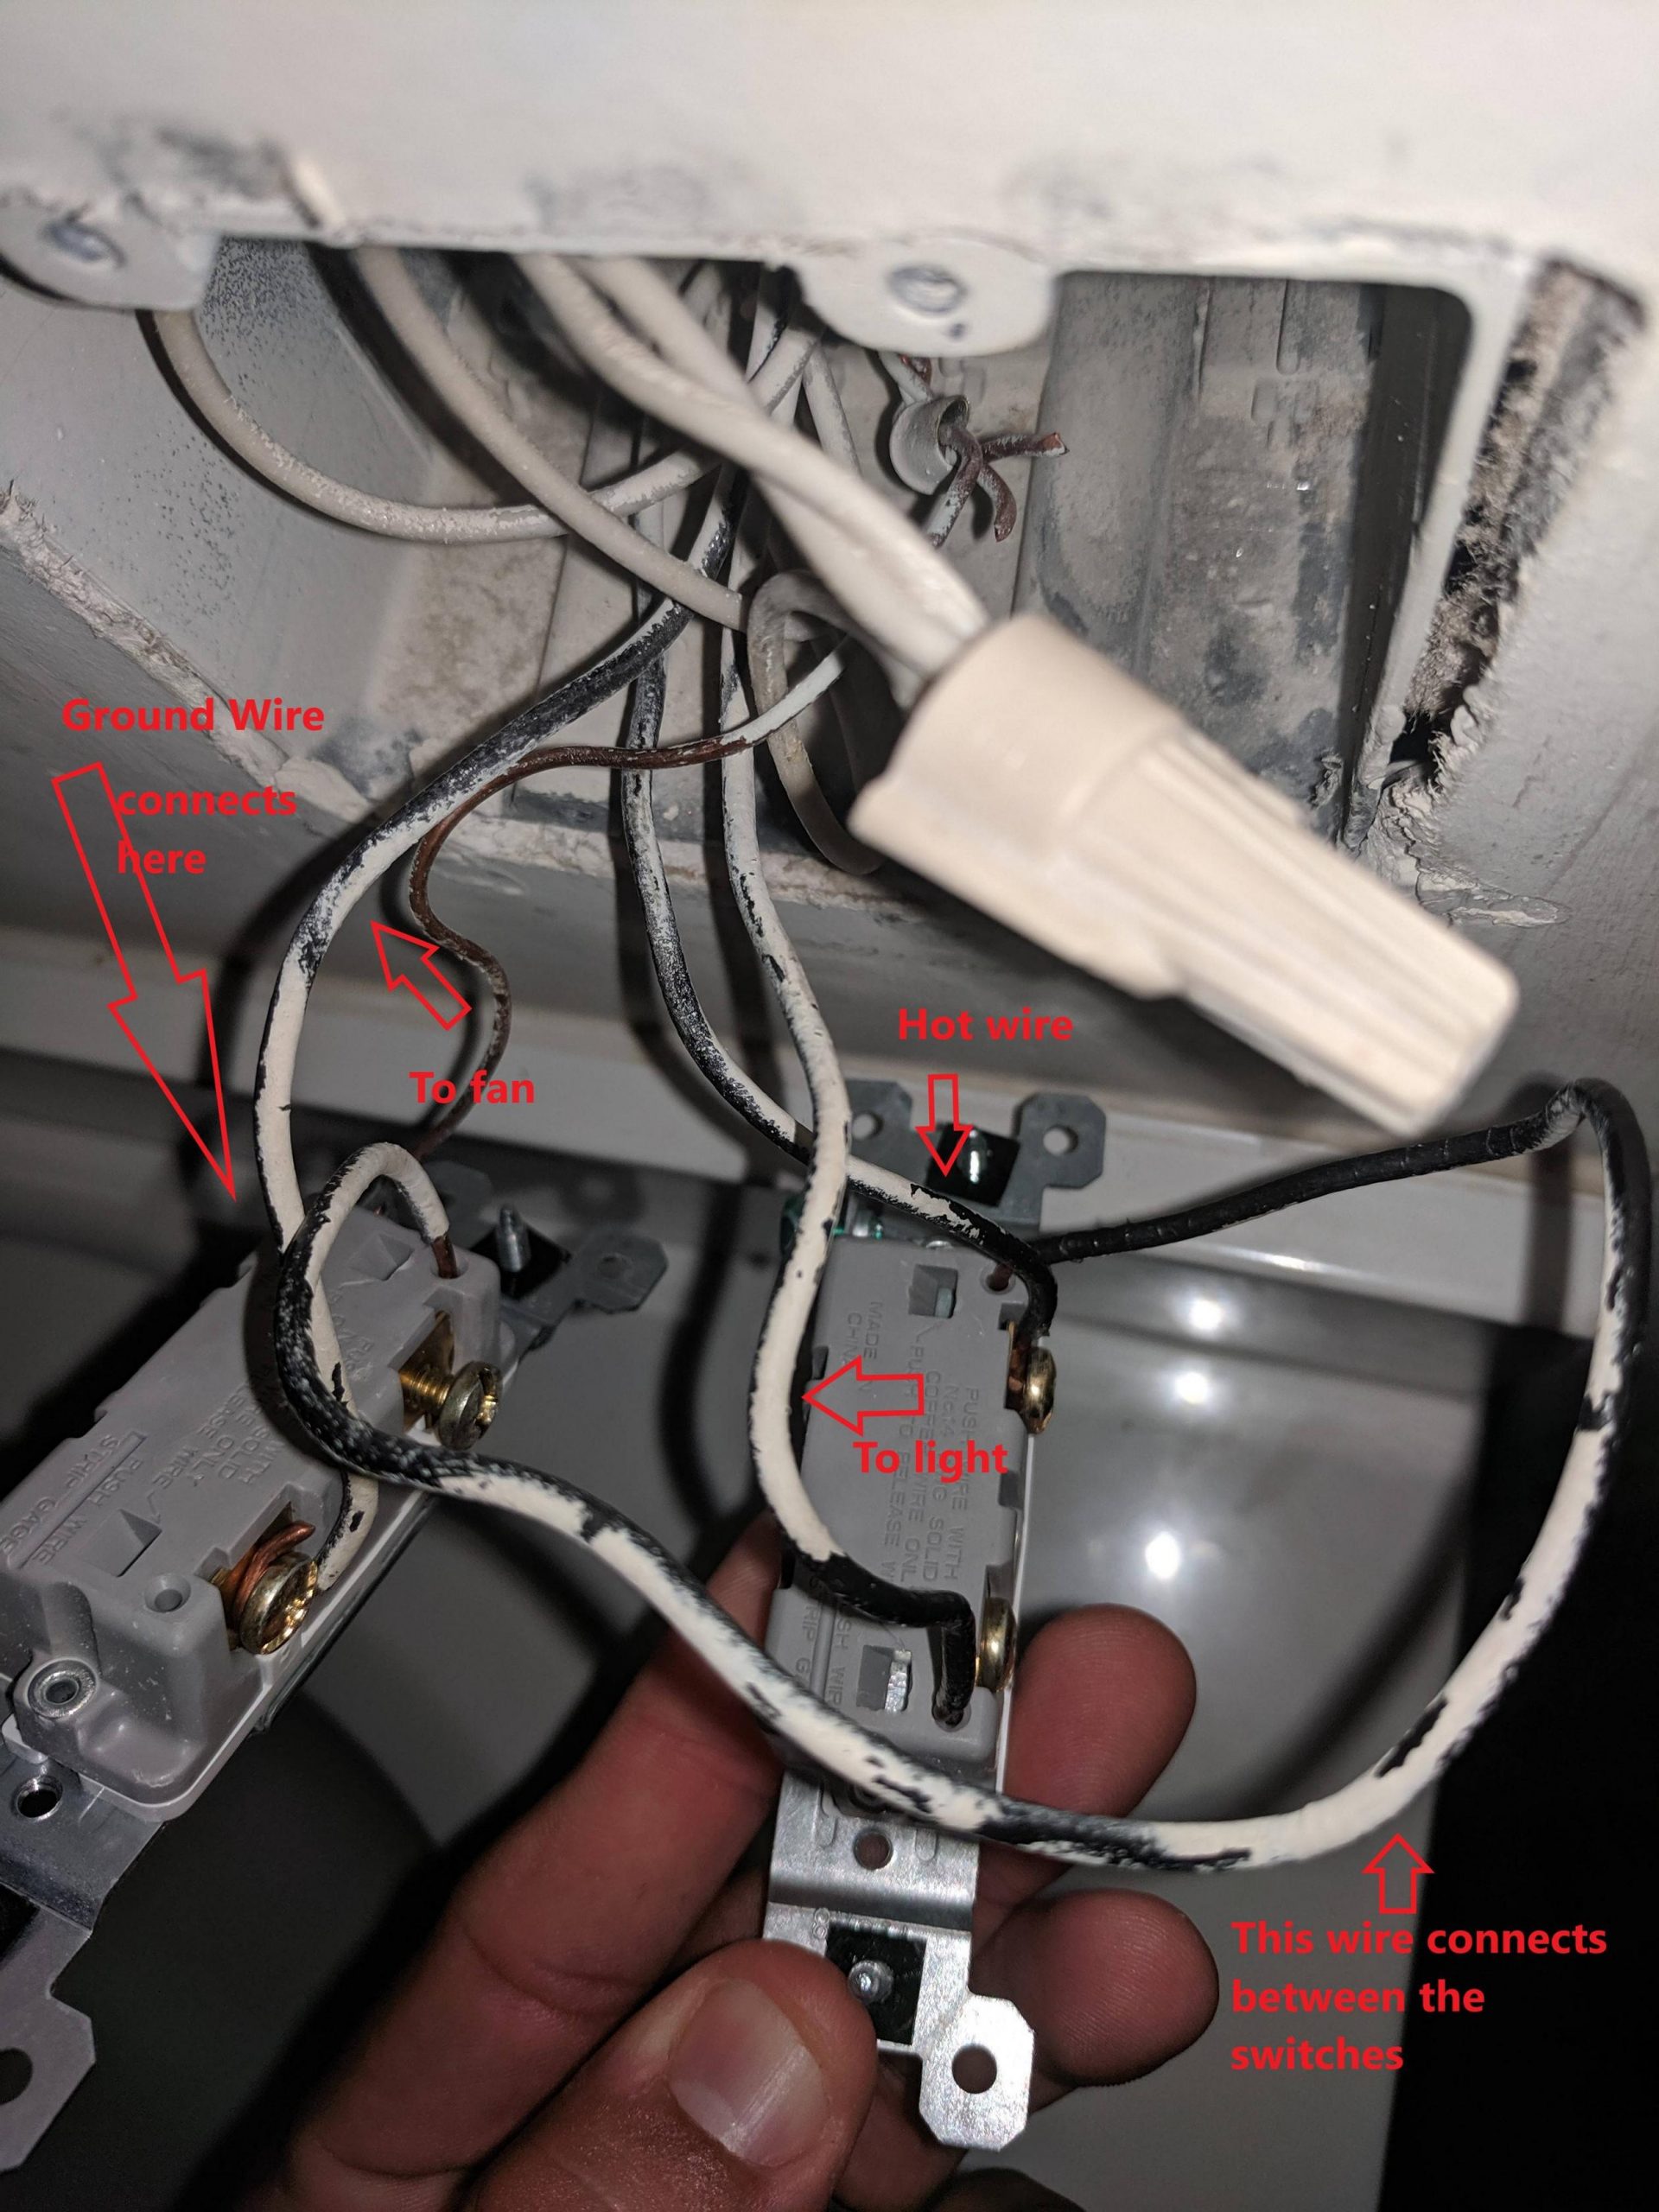 Wiring For Light Switch And Exhaust Fan Home Improvement with size 2520 X 3360